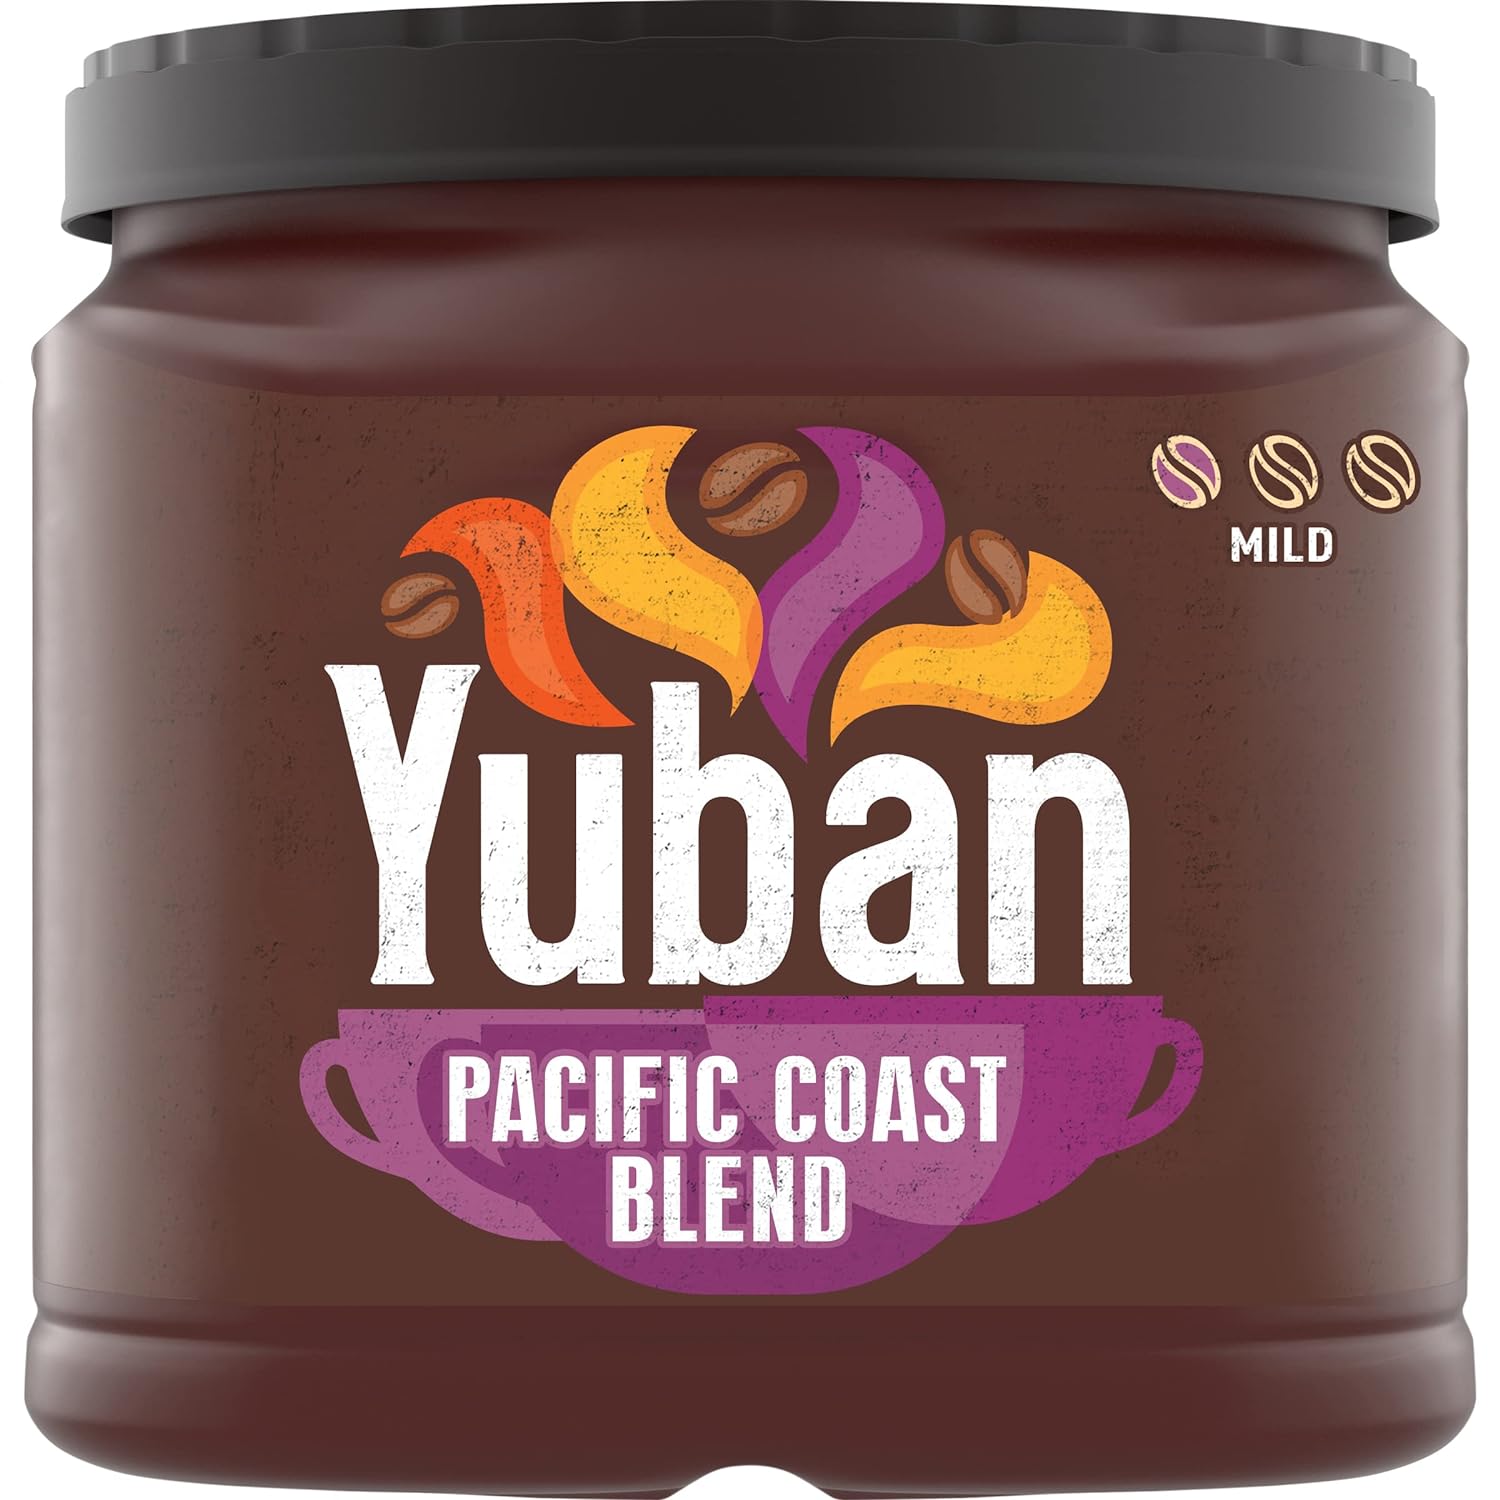 I am a Yuban lover, yes, I admit it ! This is my favorite brand because I can really taste the difference. It us a rich full bodied blend that delivers a true quality cup of coffee everytime. I have often warmed it over in my microwave the next day, if anywhere left, and it never tastes bitter or anything unpleasant. I can't always find this in my grocery store so I have it on a monthly delivery from the Amazon Panty subscribe and save ordering and it is the best way to insure that I have my fav